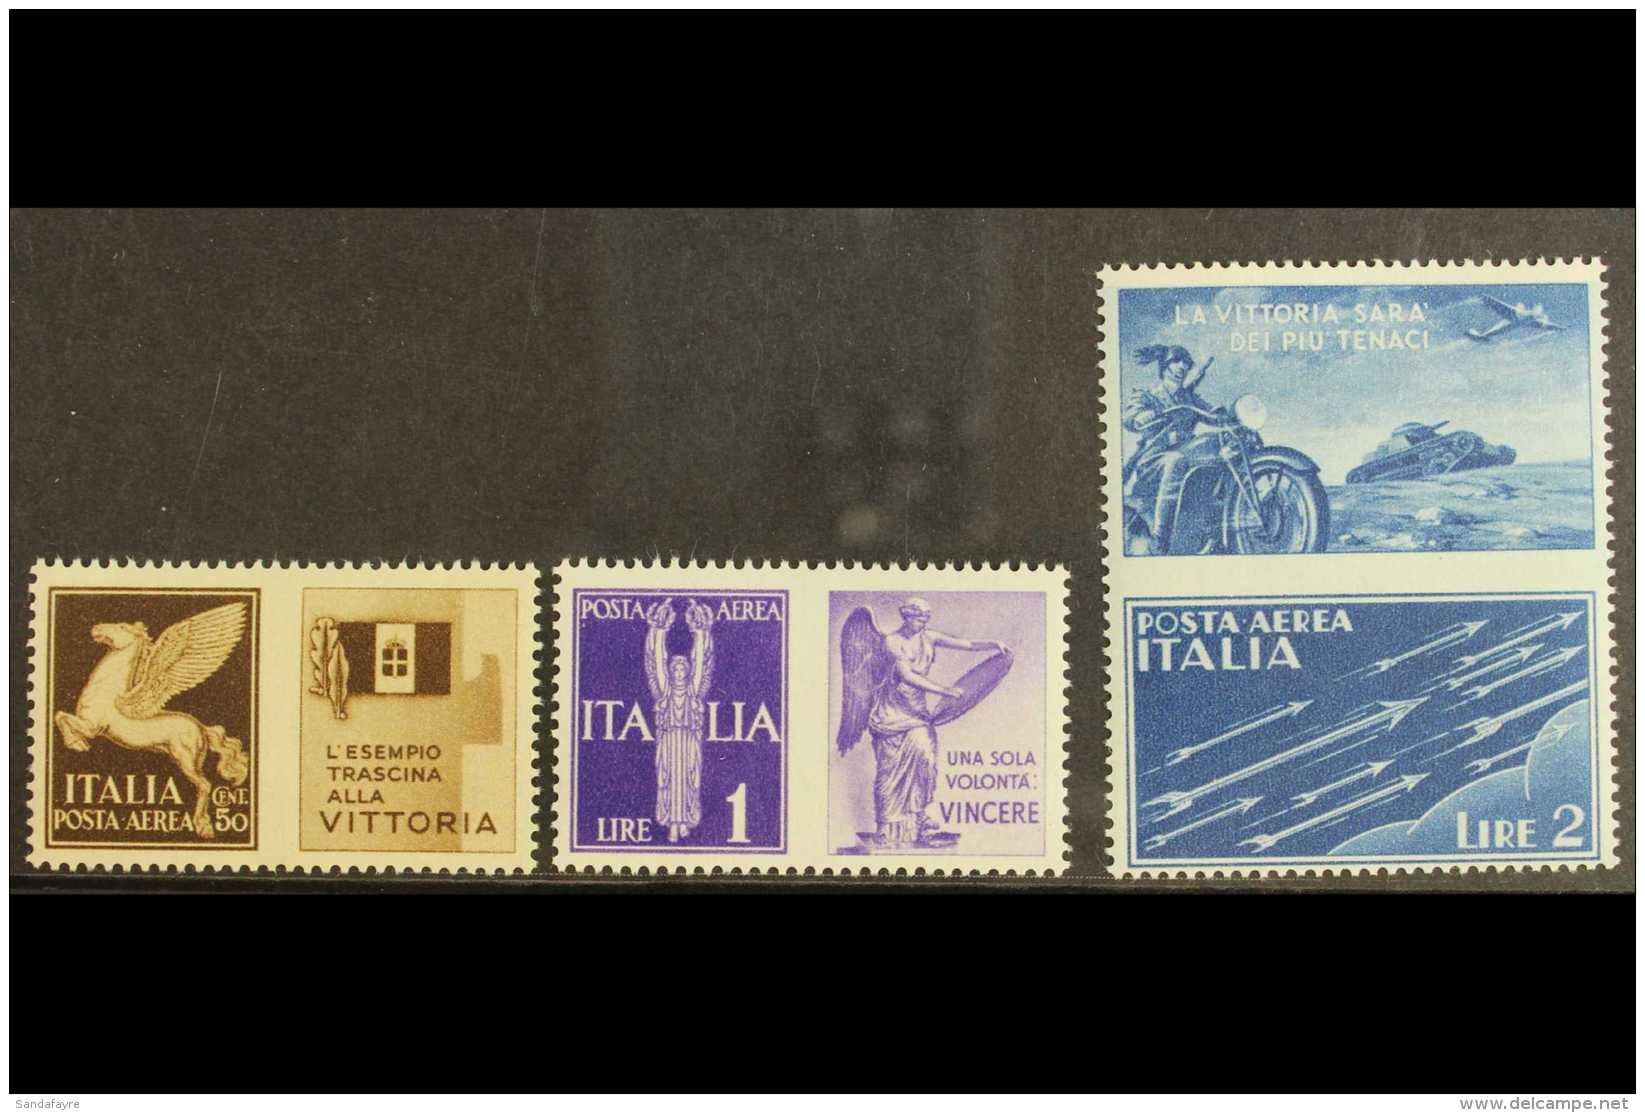 WWII - ITALY WAR PROPAGANDA STAMPS - 1942 Unissued Airmail Set With Se-tenant Propaganda Labels, Sass S1601,... - Non Classificati